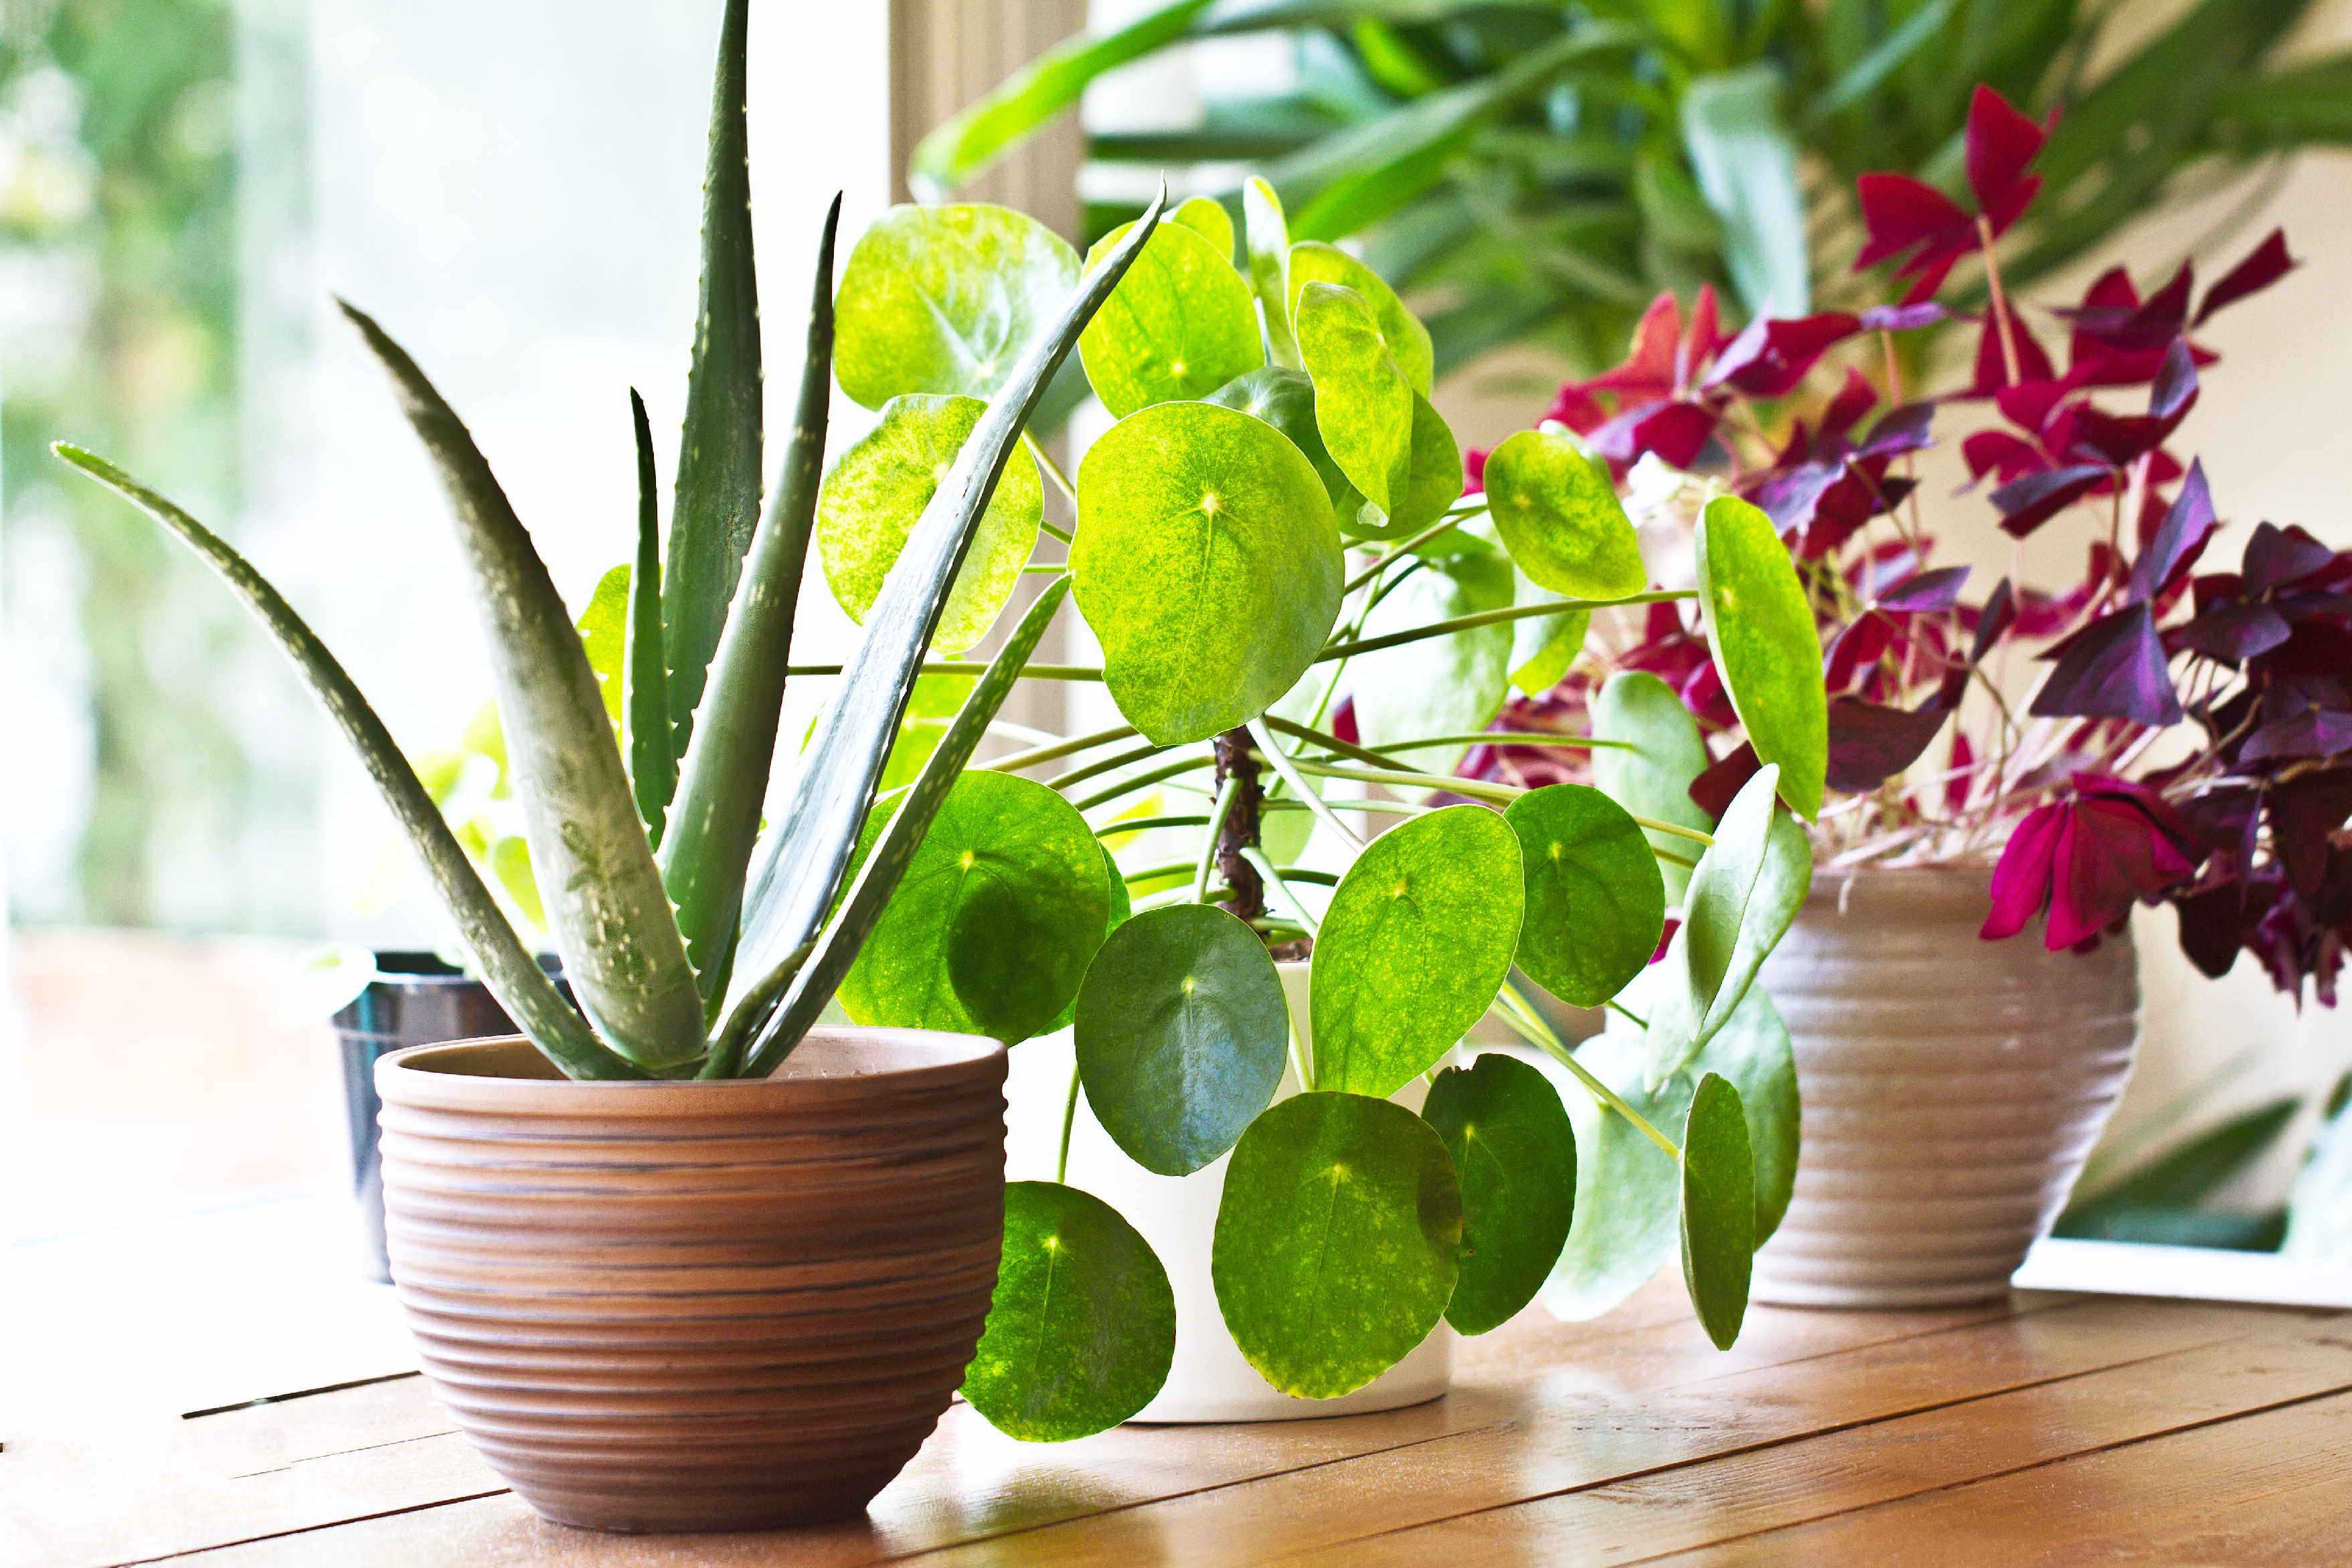 13 of the best indoor plants for your home